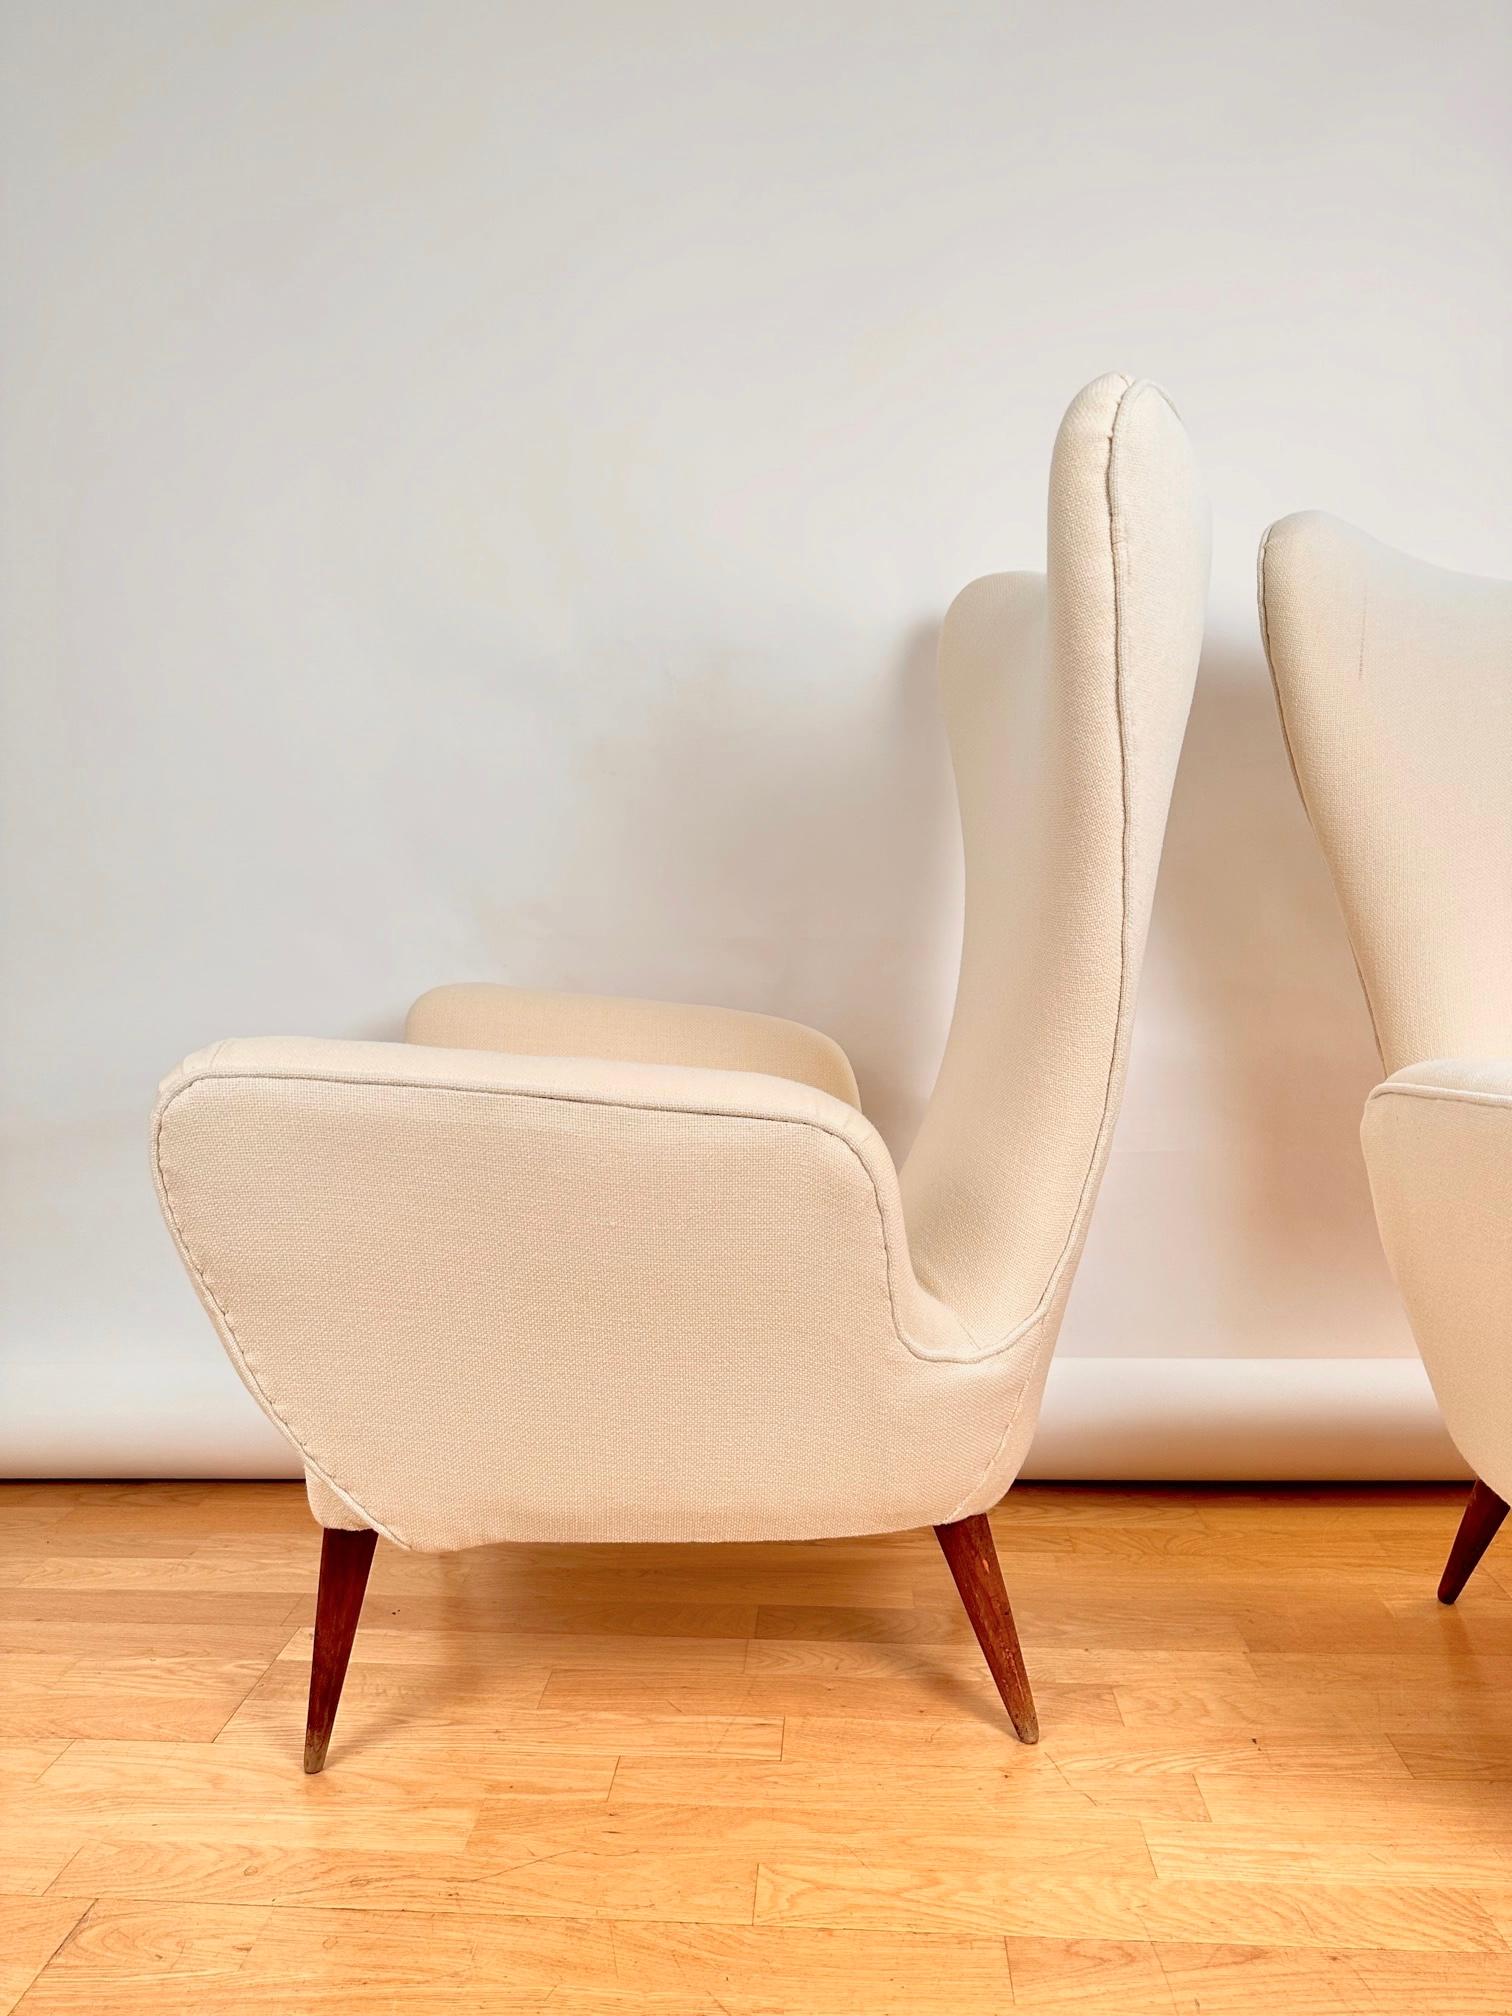 Mid-20th Century Pair of Midcentury High Back Armchairs by E. Sala and G. Madini, Kvadrat Fabric For Sale